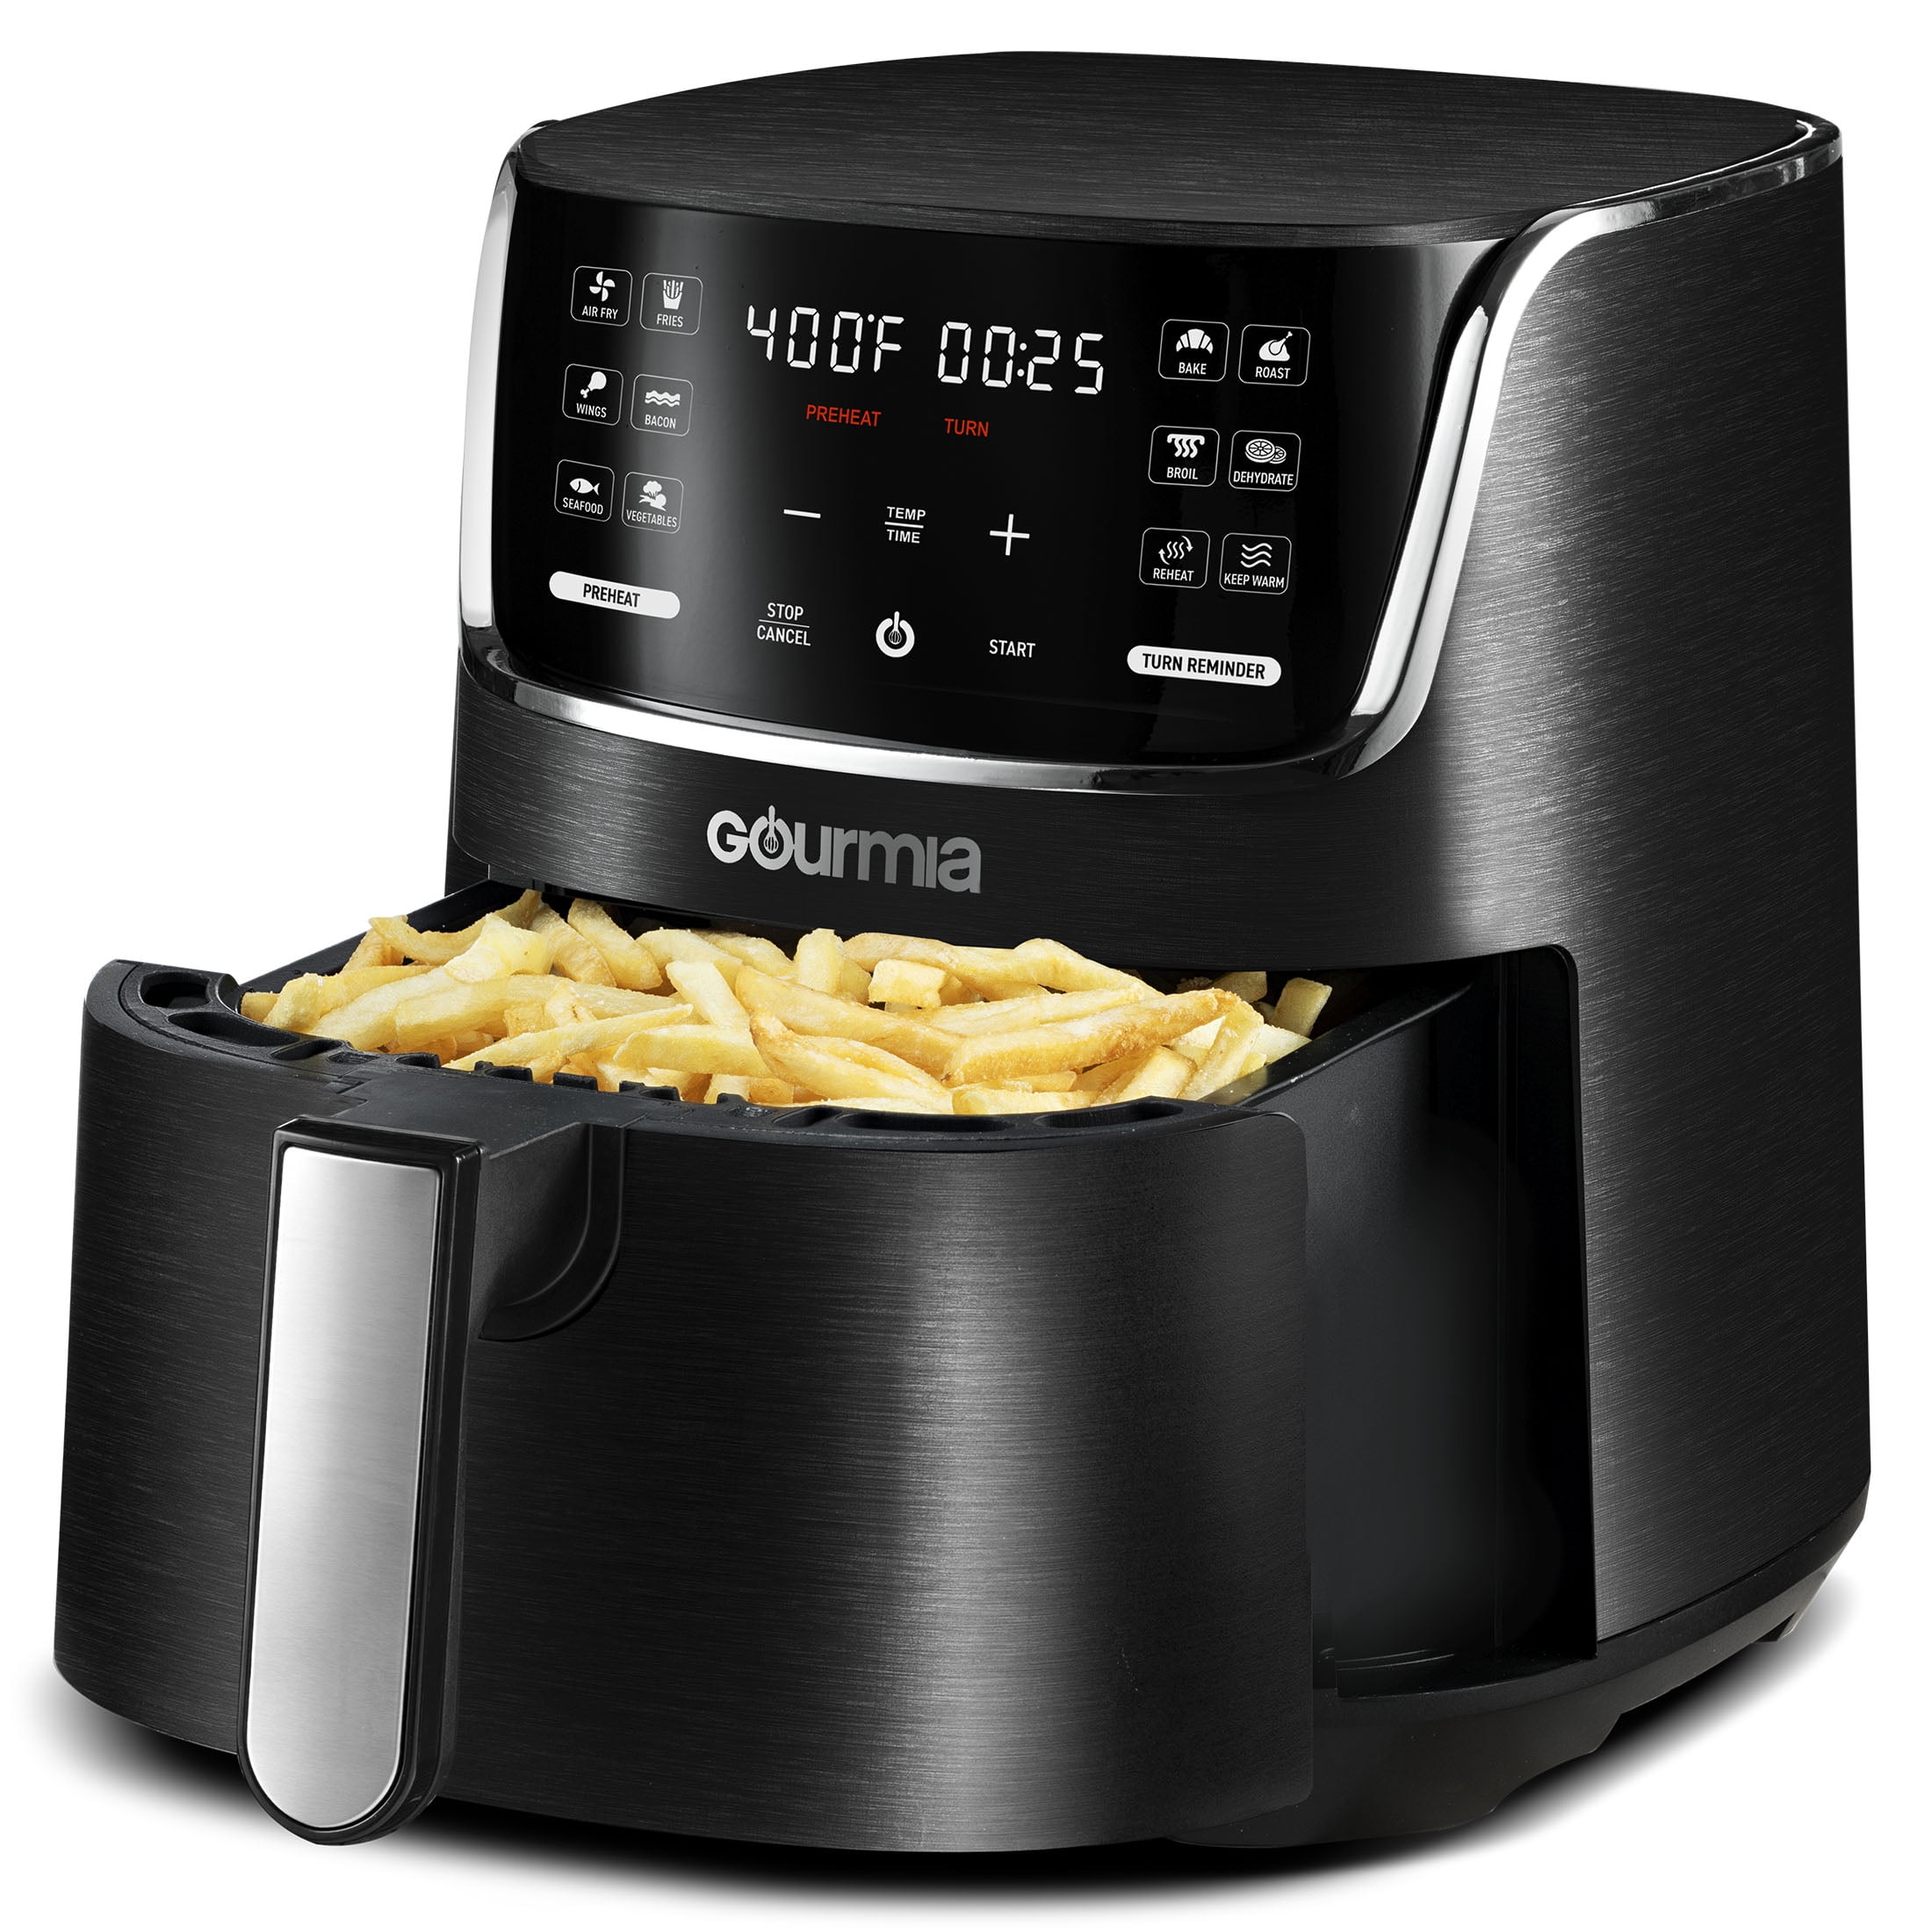 Gourmia Air Fryer Unboxing - What Does $50 Buy You? French Fries